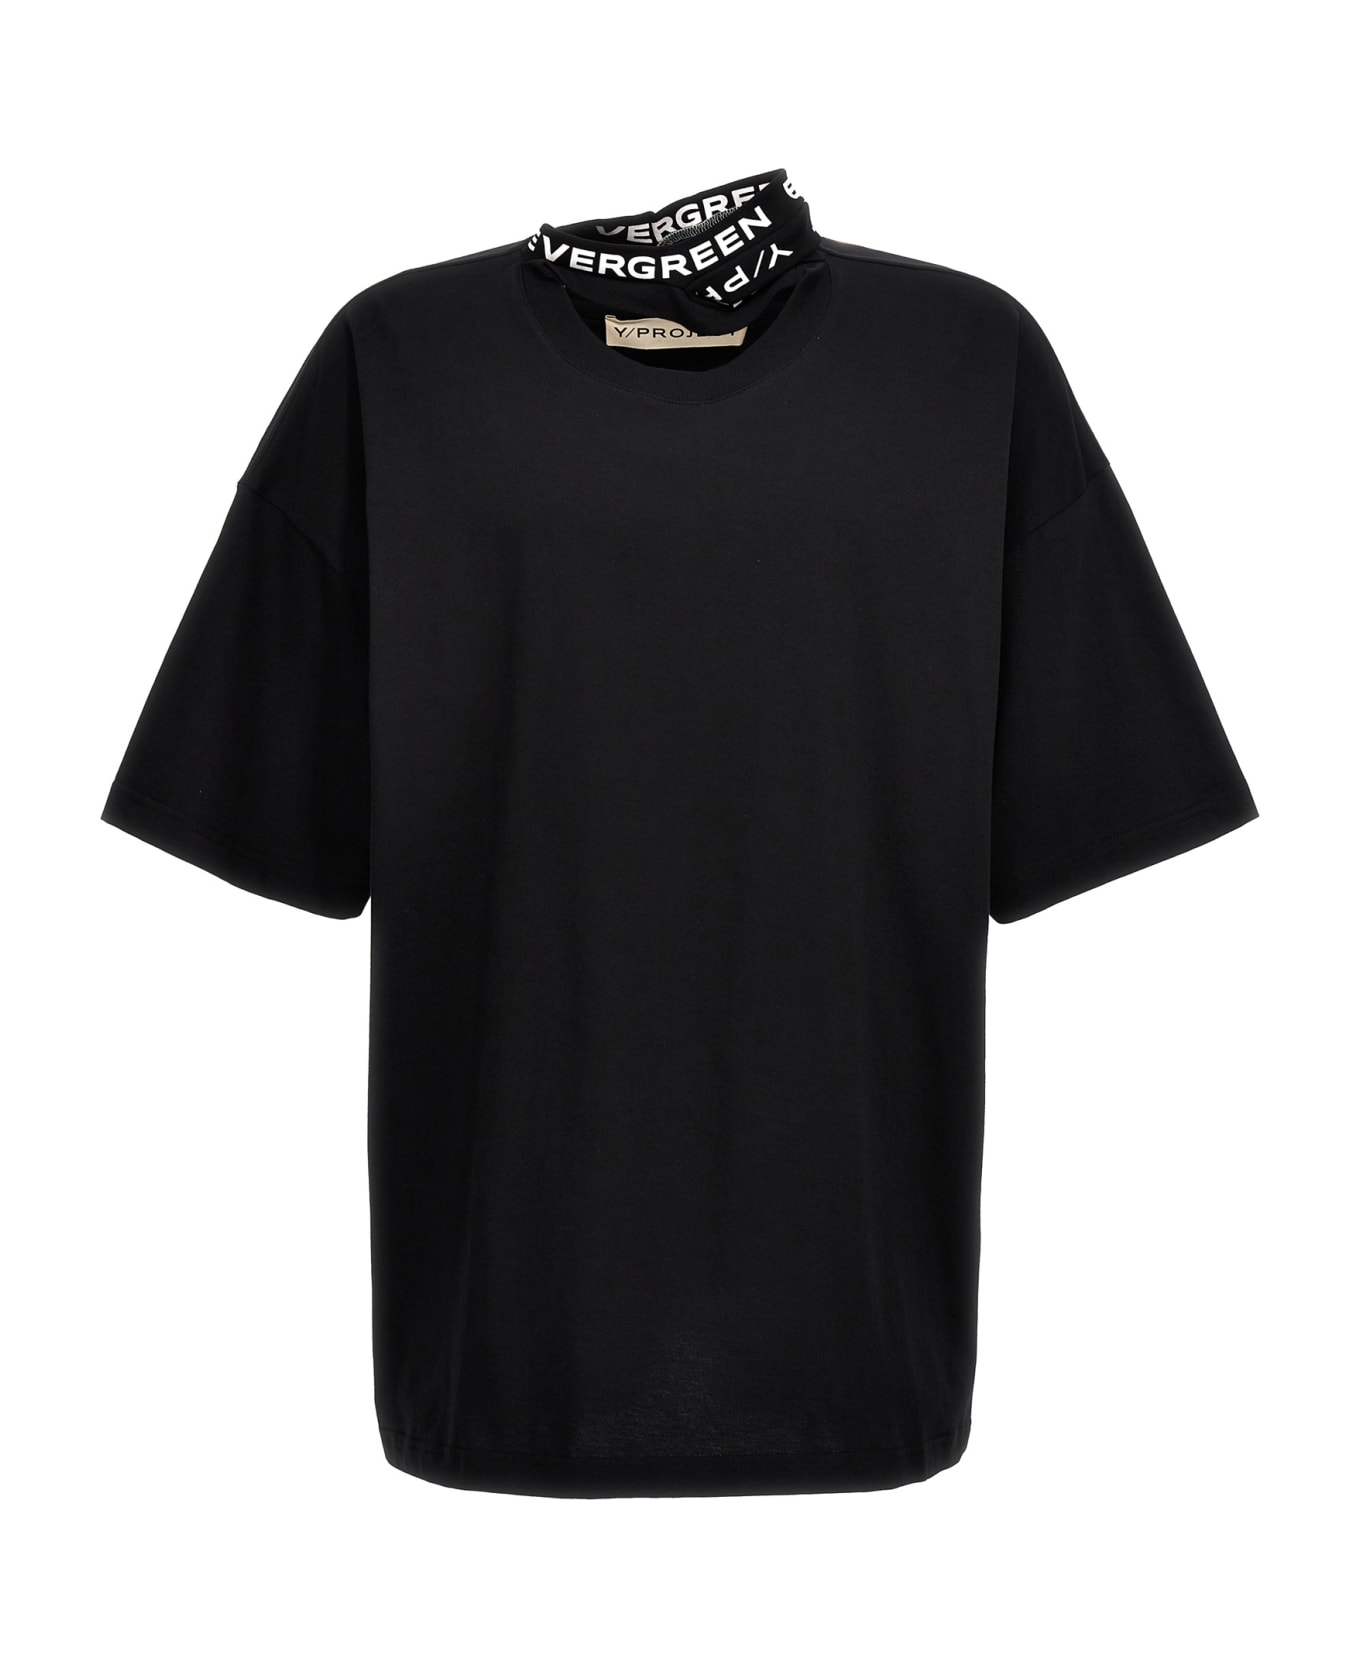 Y/Project 'evergreen' T-shirt - Black  